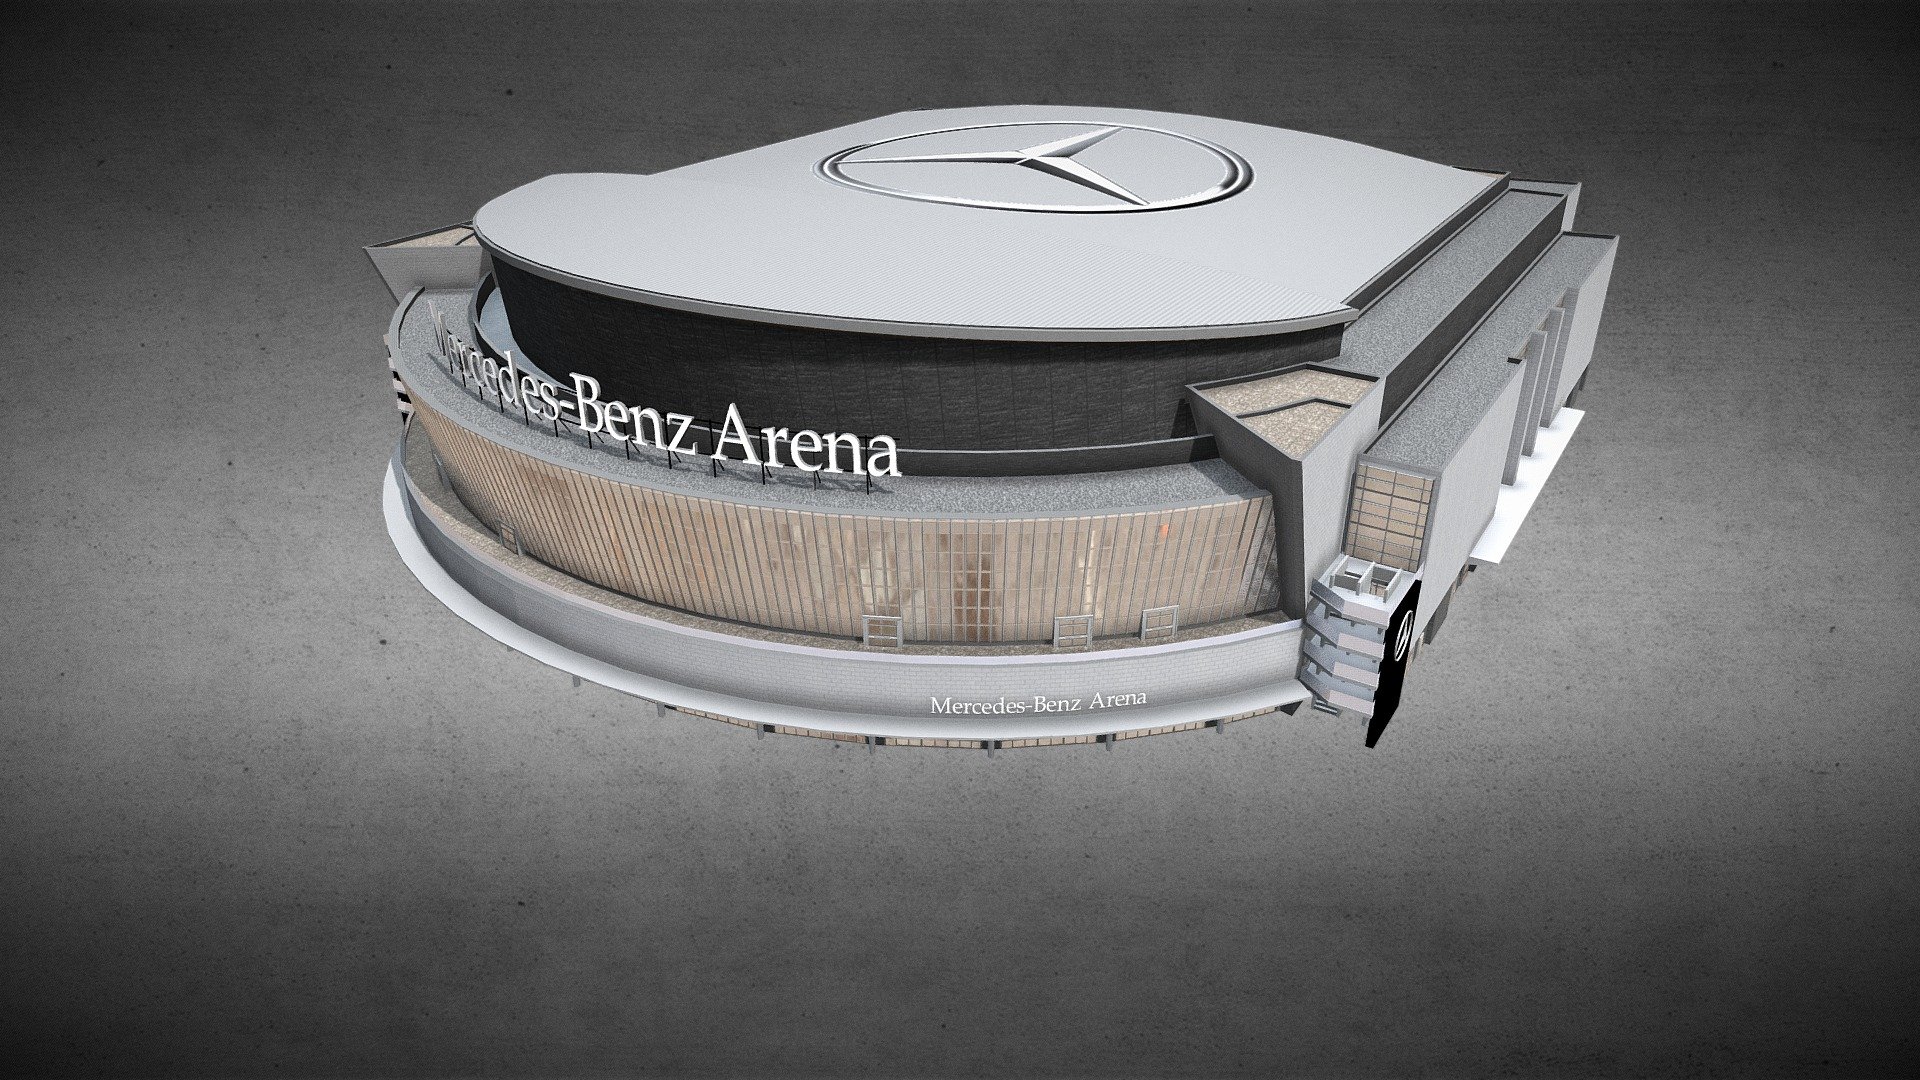 Mercedes-Benz Arena - Berlin

The Mercedes-Benz Arena (formerly O2 World) is an omni-sports venue located in the Berlin district of Friedrichshain (Bezirk de Friedrichshain-Kreuzberg).
It is mainly used for ice hockey, basketball, concerts and other events.

Created and adapted for the game &ldquo;Cities Skylines&ldquo; - Mercedes-Benz Arena - Berlin - Buy Royalty Free 3D model by luminou_CS (@luminou) 3d model